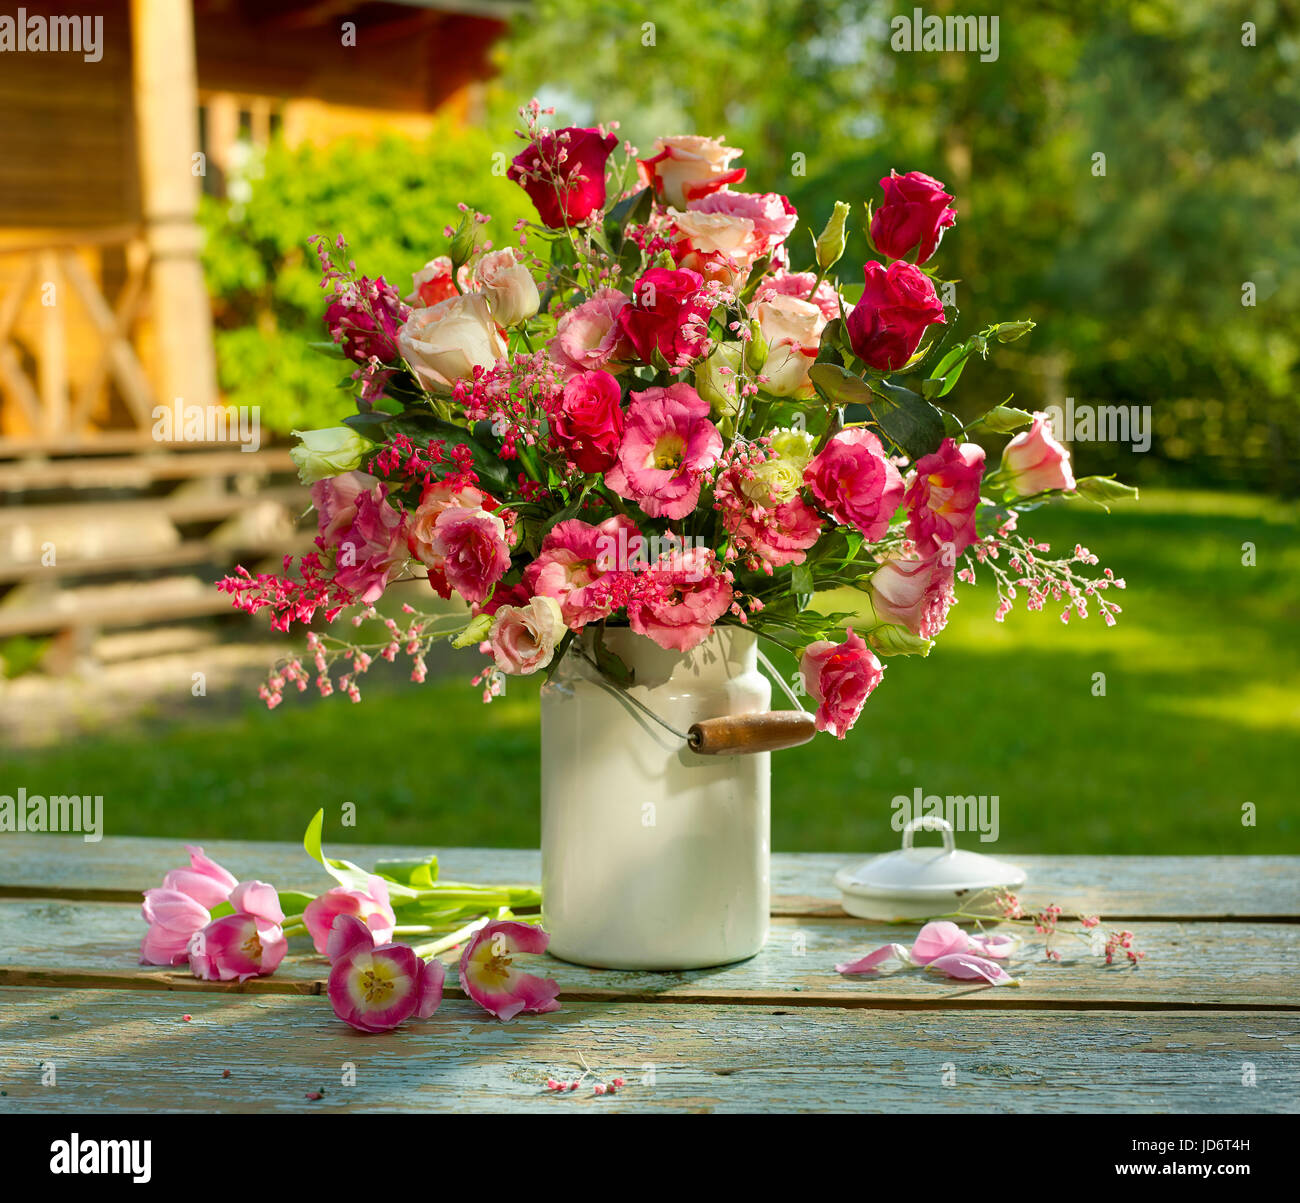 Bouquet of flowers with roses and tulips. Stock Photo